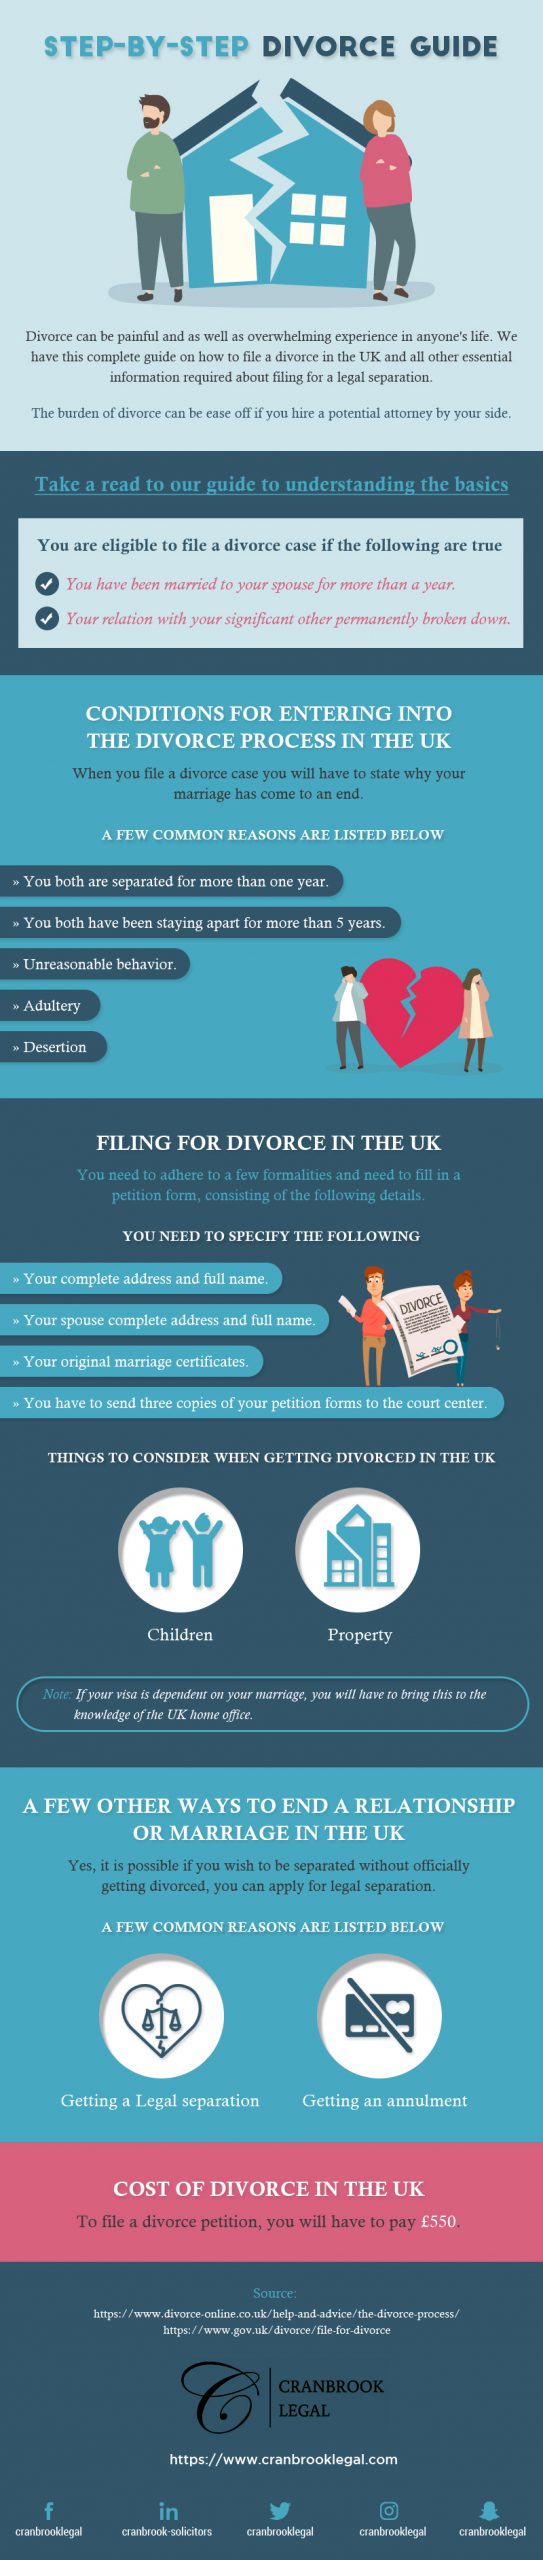 Step by Step Divorce Guide scaled